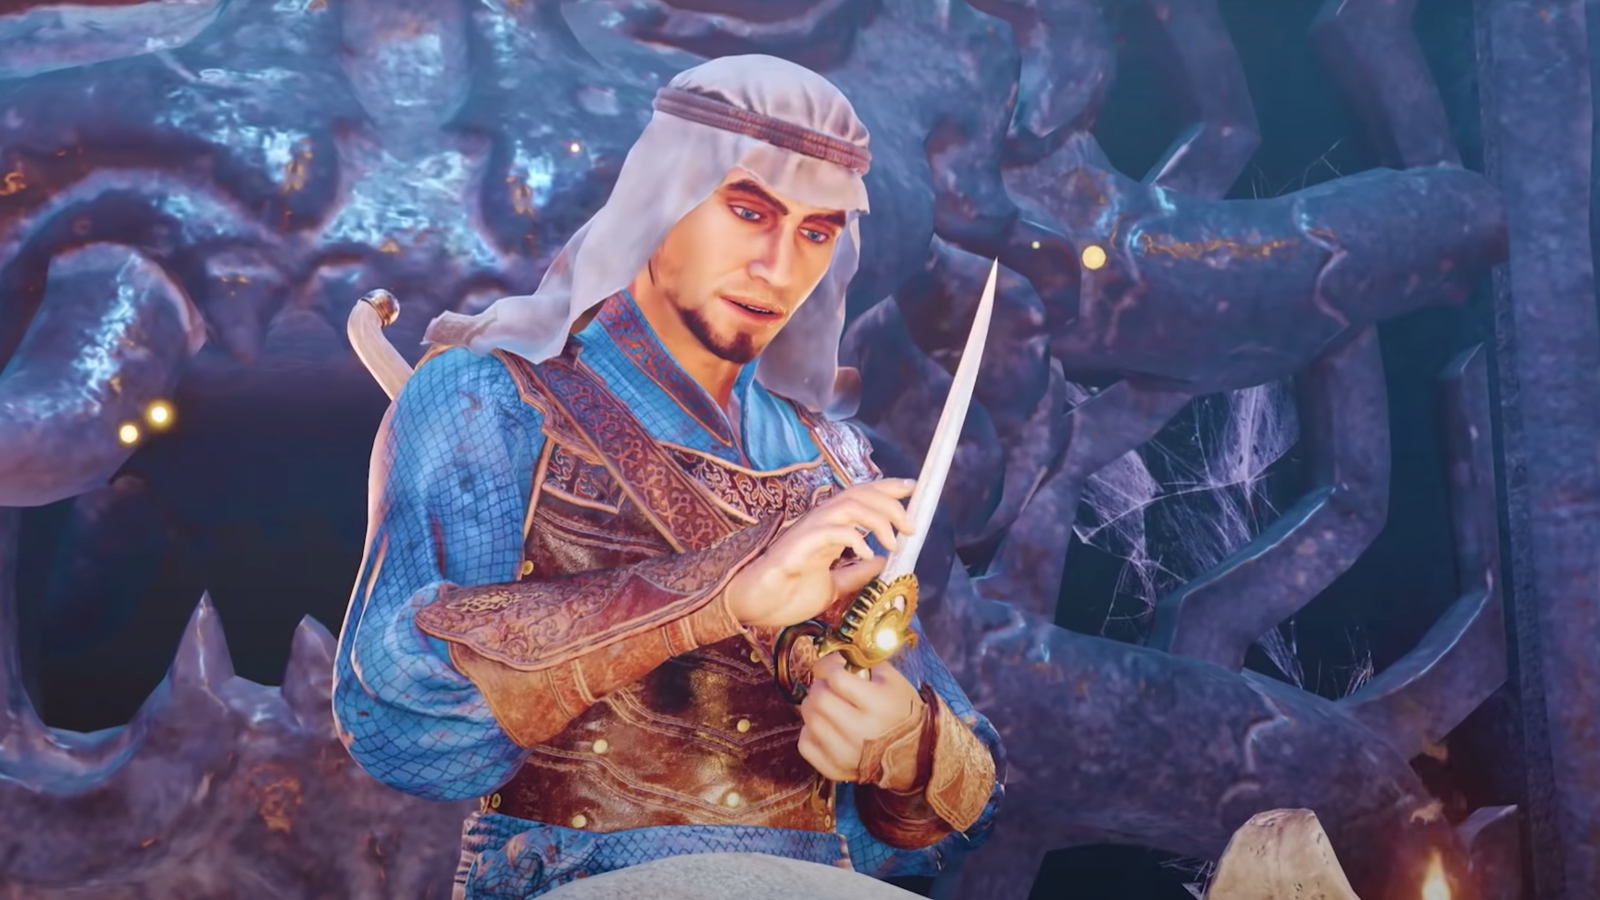 Prince Of Persia: The Sands Of Time Remake Delayed To Next Year